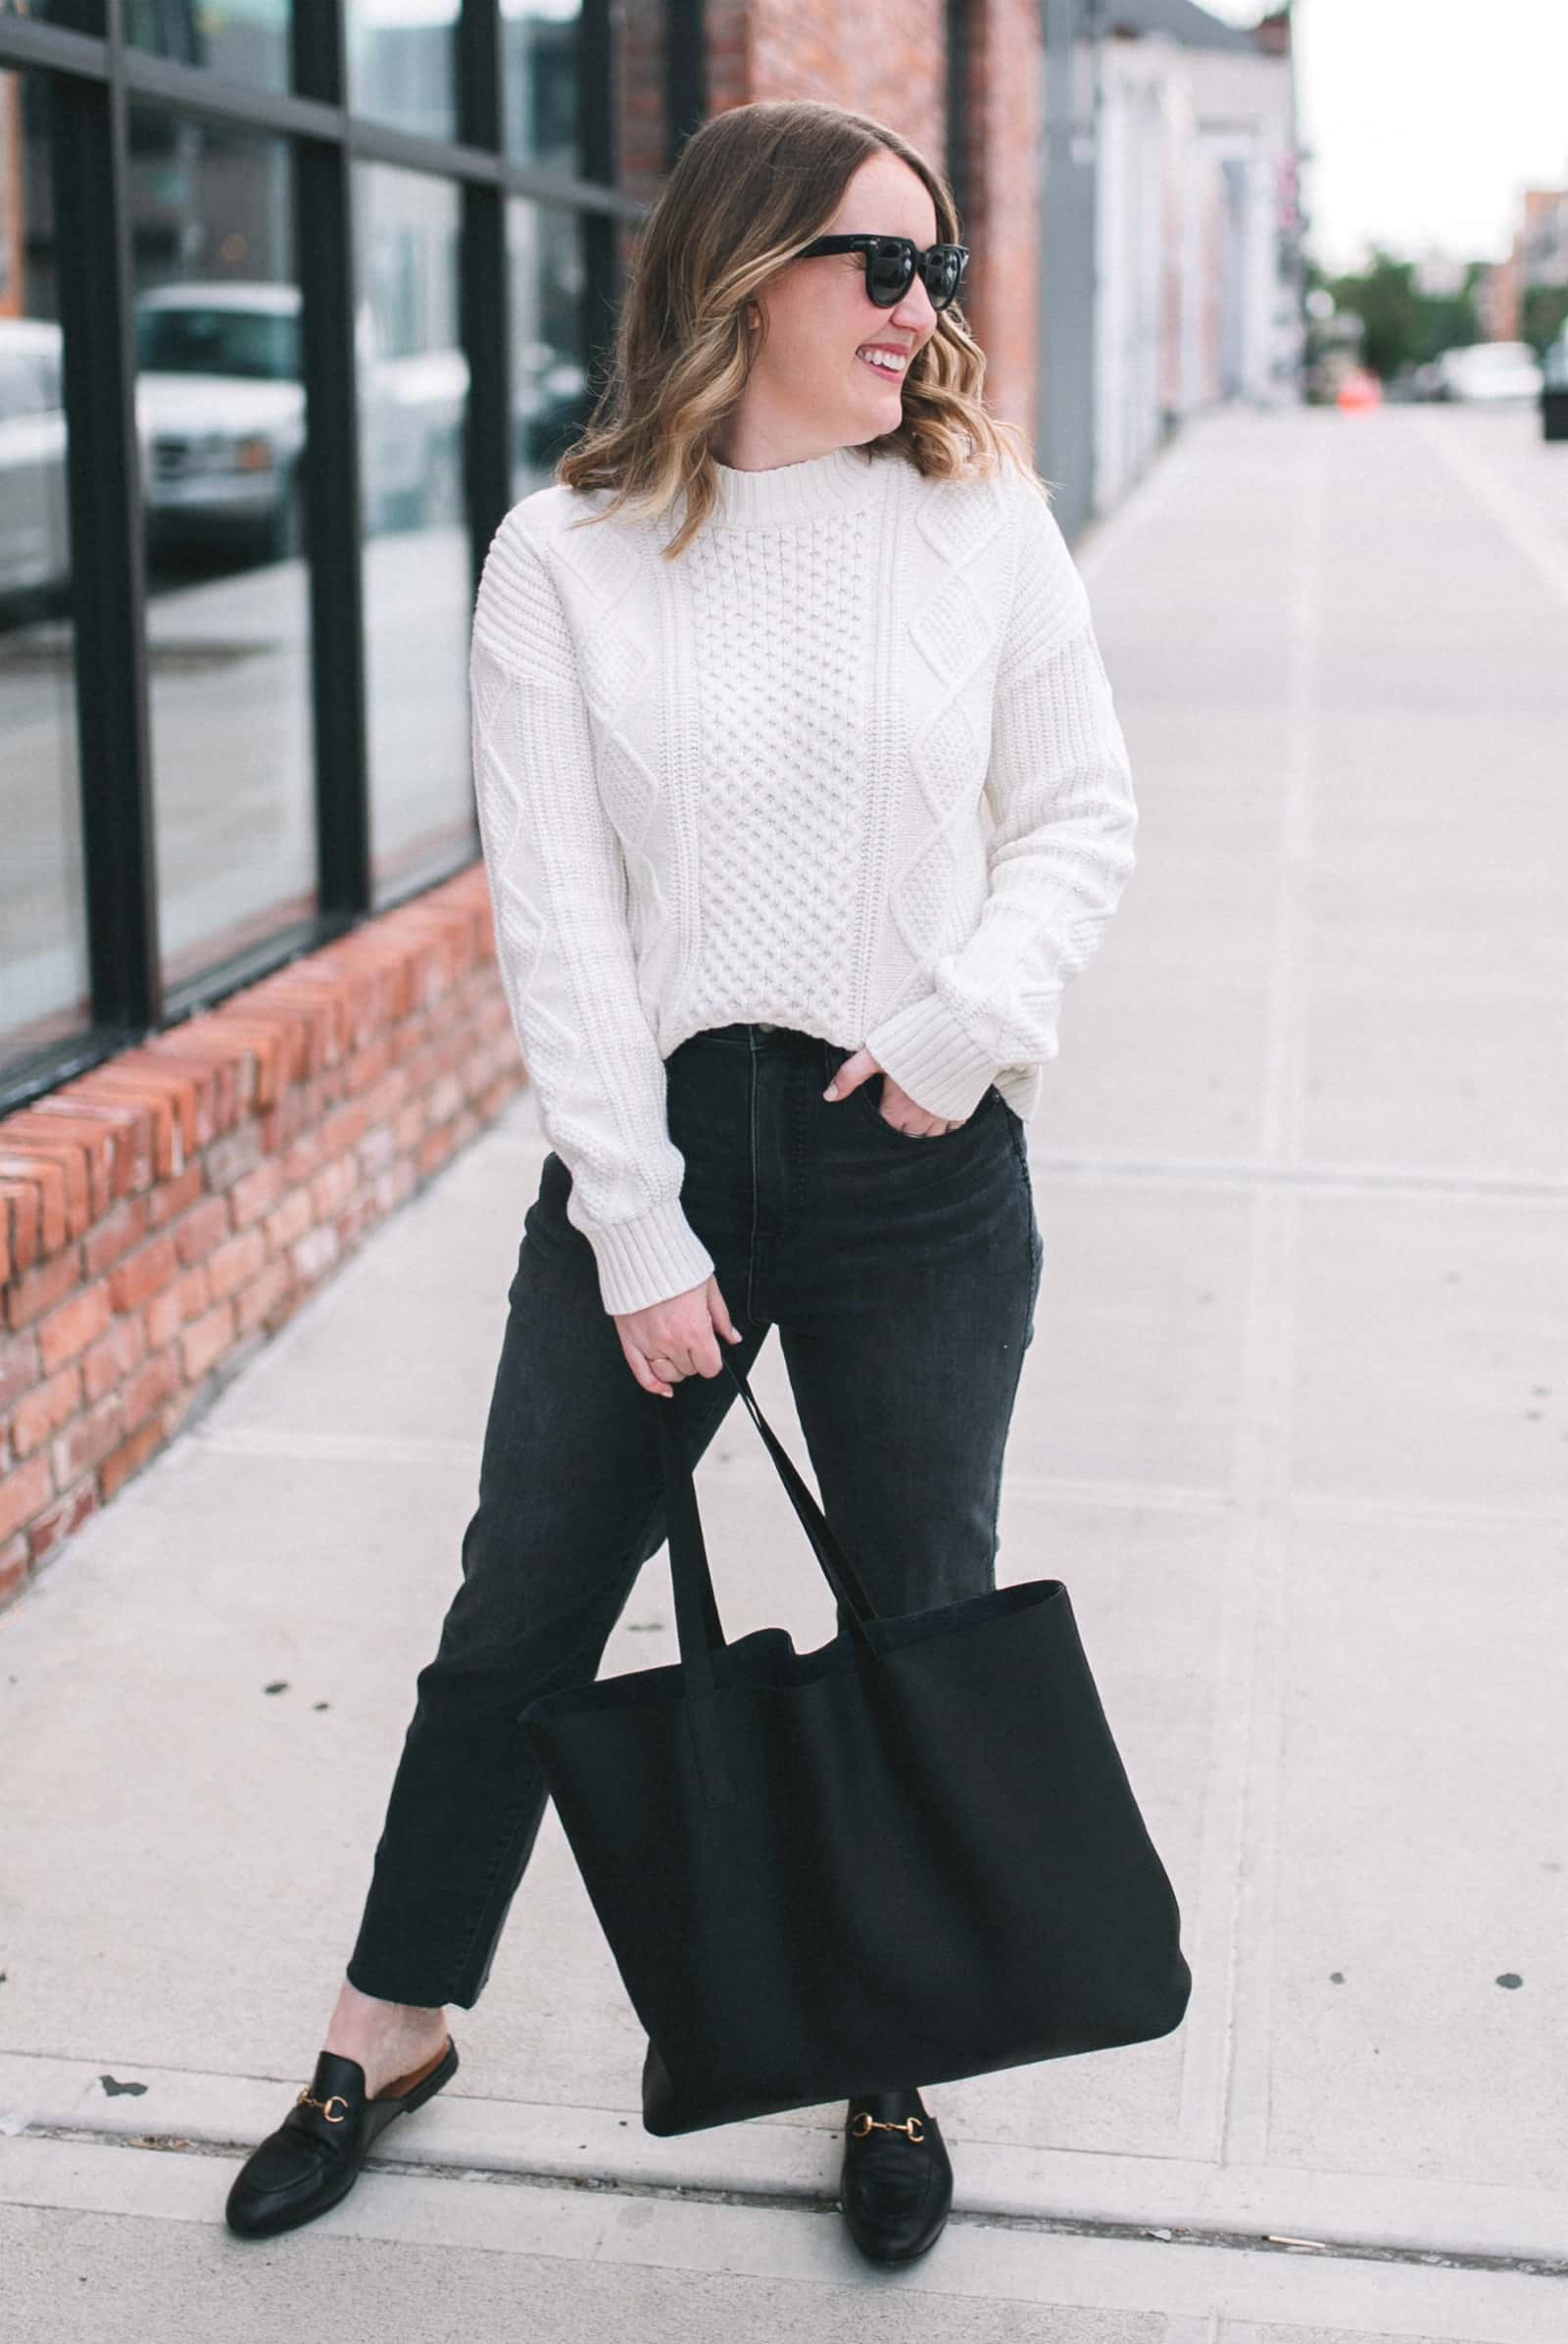 Classic Cable Knit Sweater | Things I Own That Are Currently On Sale